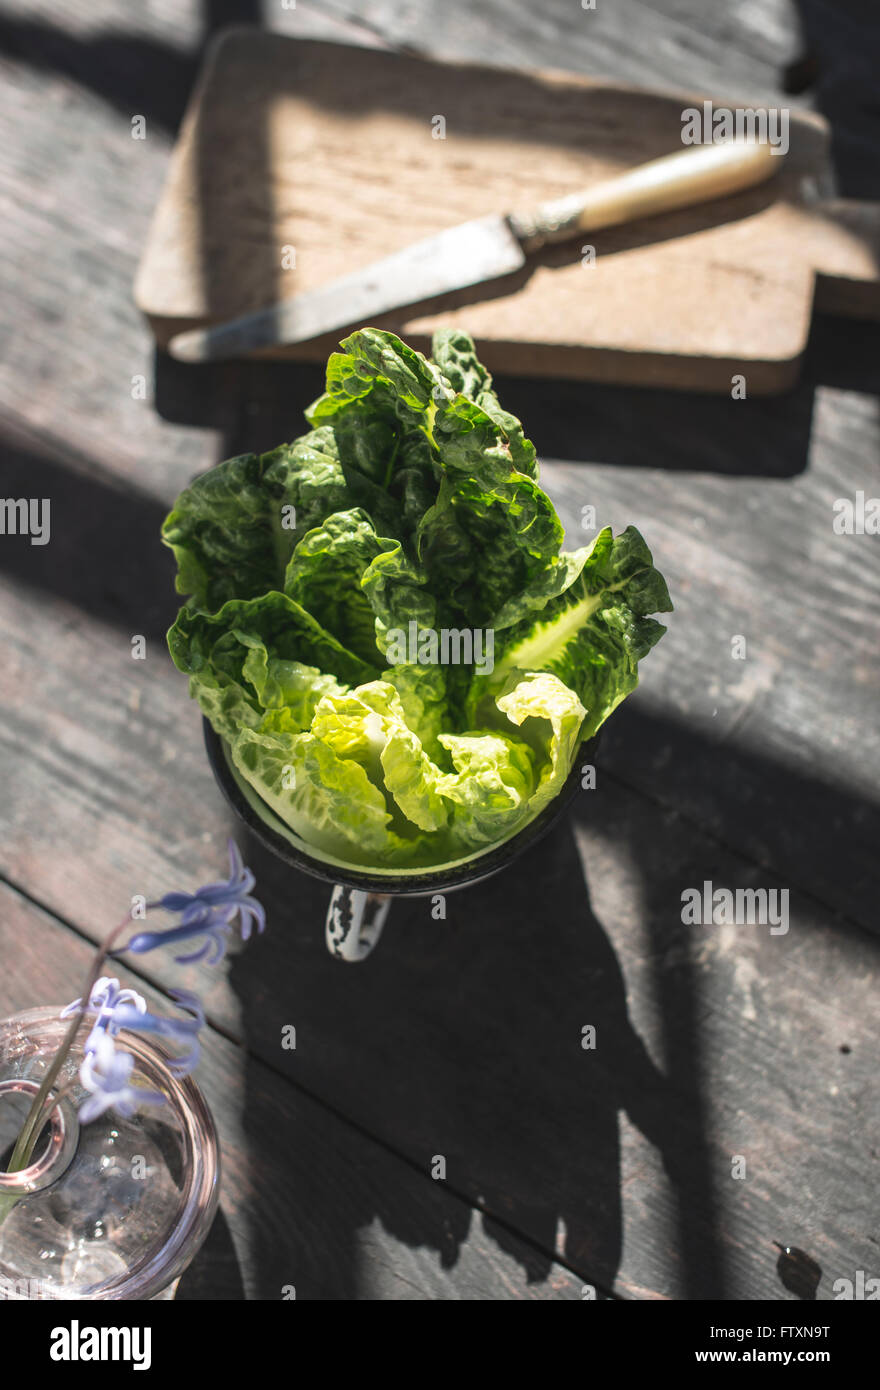 Lettuce leaves on wooden table Stock Photo